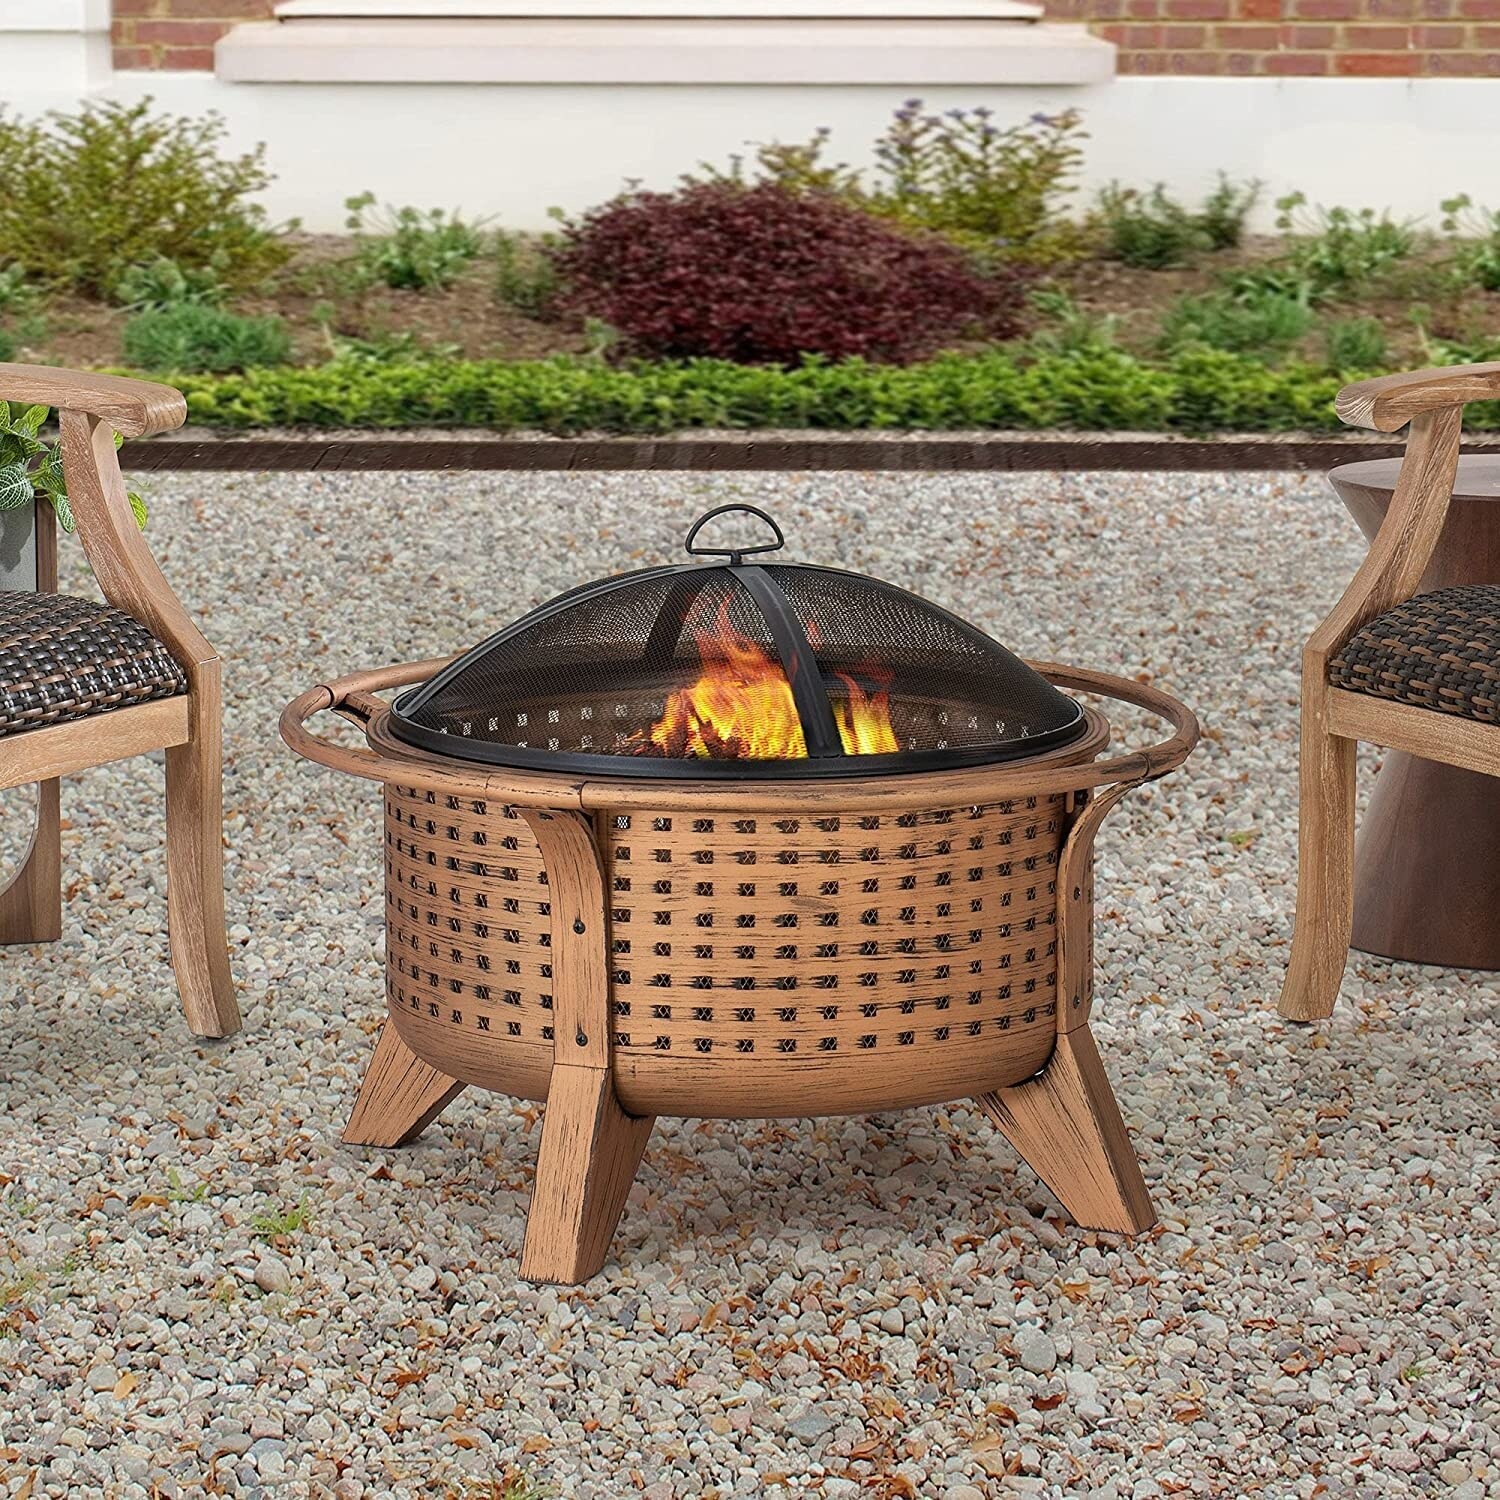 https://ak1.ostkcdn.com/images/products/is/images/direct/0f65d86d0cdf4638c6d19e4a6b6ab992d51e5f48/Sunjoy-30-in.-Outdoor-Wood-Burning-Fire-Pit%2C-Patio-Woven-Round-Steel-Firepit-Outside-with-Spark-Screen-and-Poker.jpg